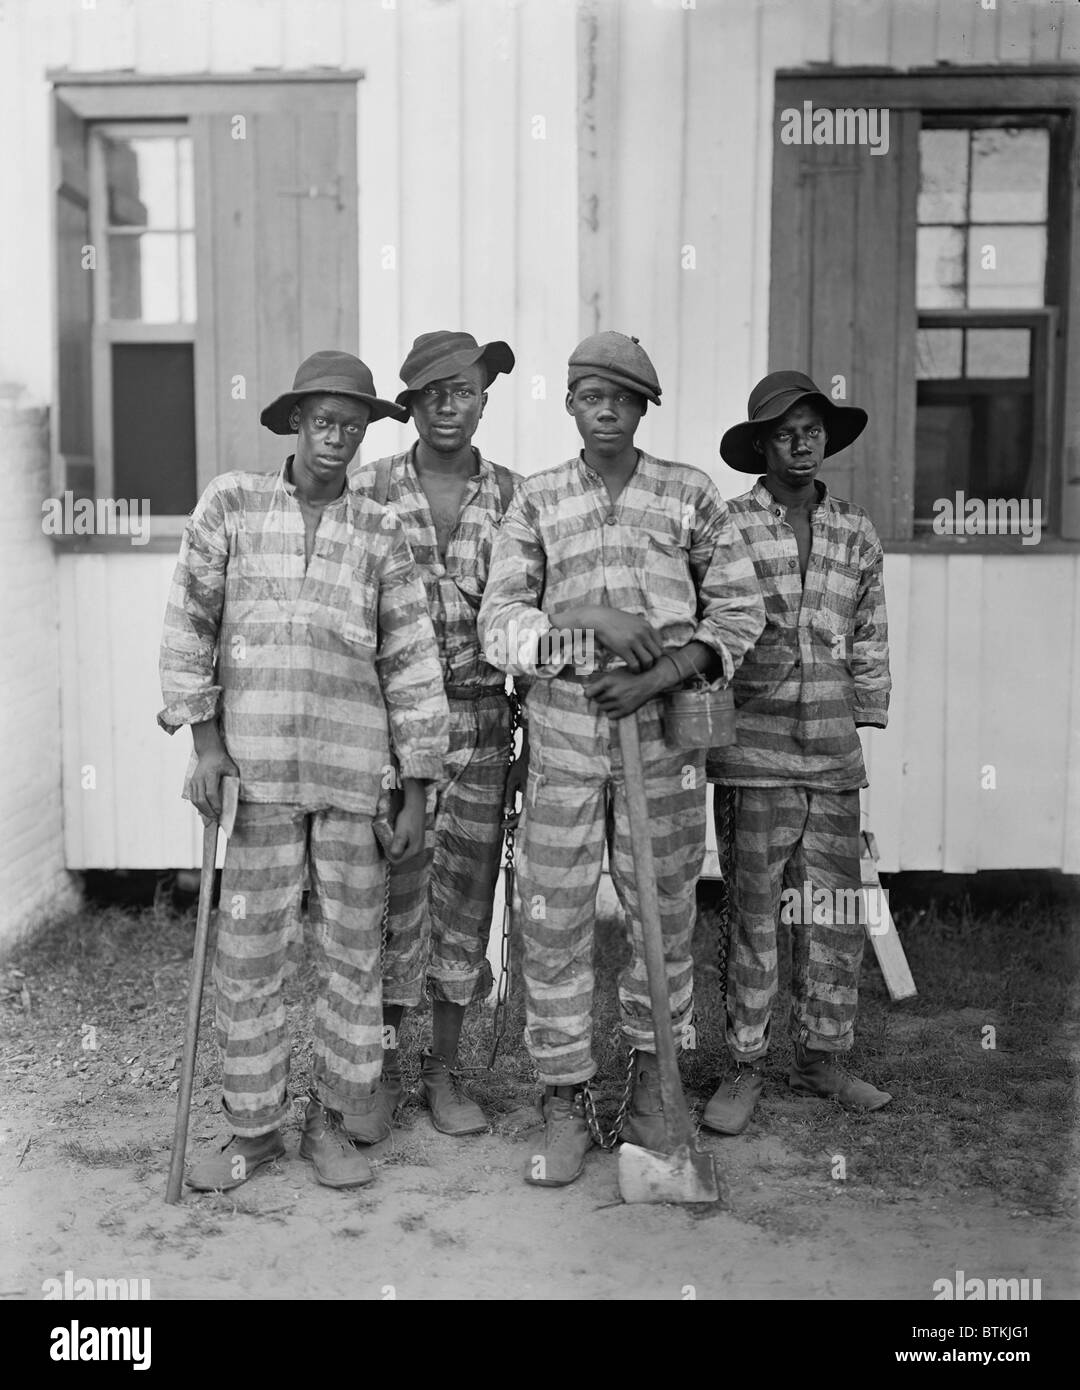 Four African American youths in a Southern chain gang. Southern jails made money leasing convicts for forced labor in the Jim Crow South. Circa. 1900 Stock Photo